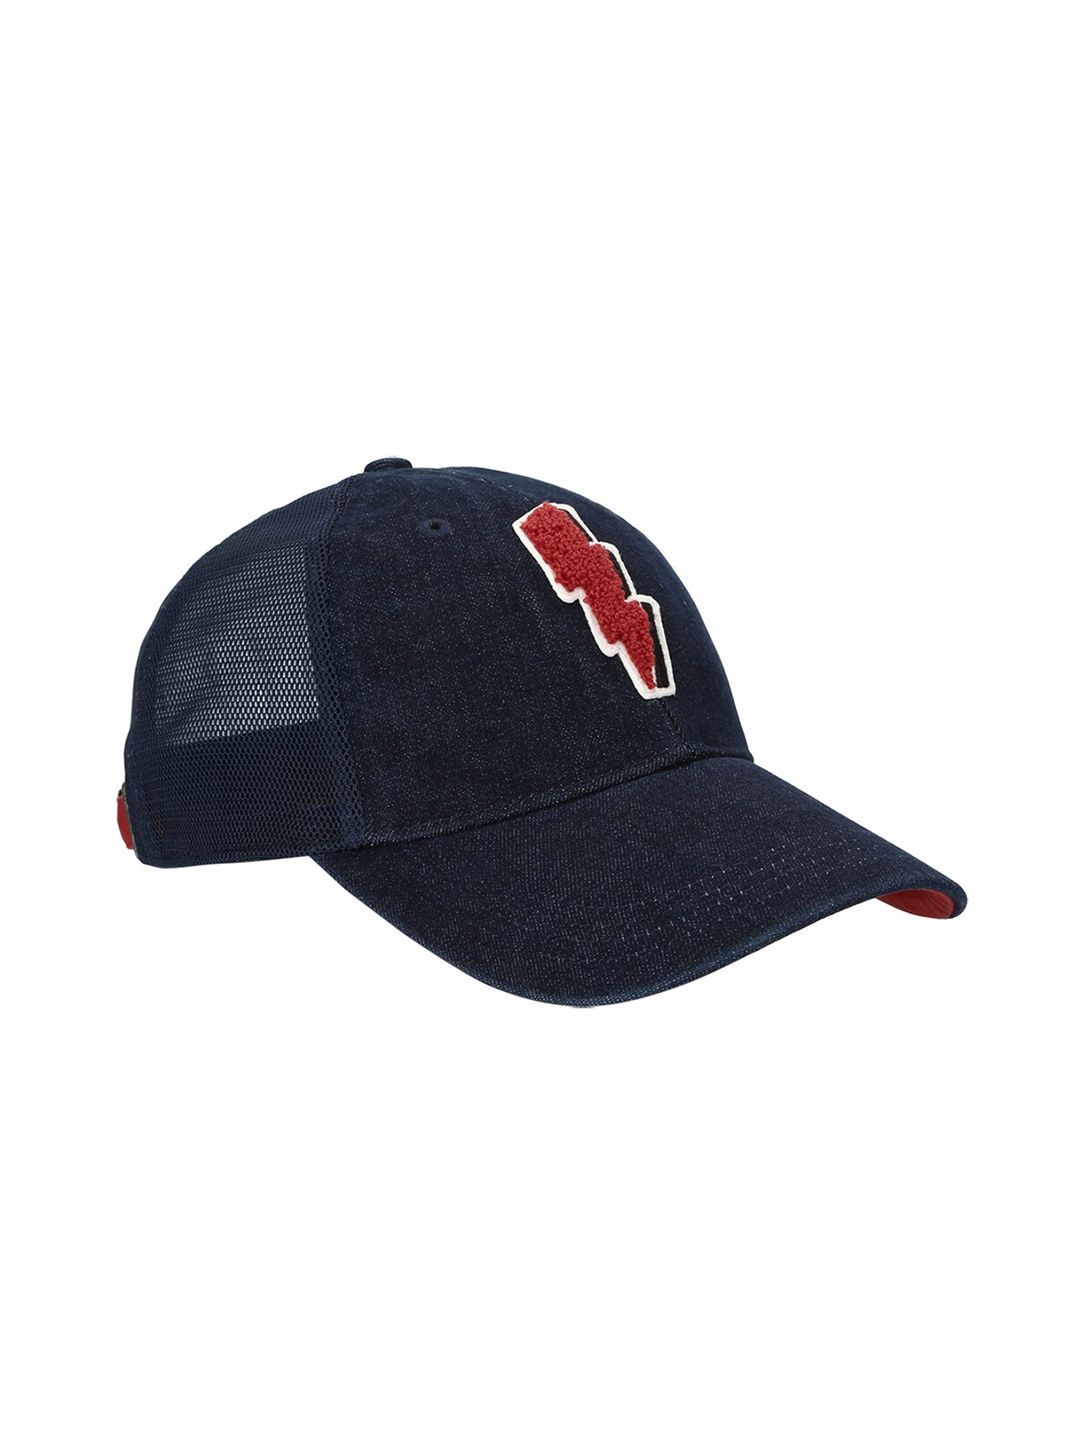 Royal Enfield Unisex Blue & Red Embroidered Baseball Cap Price in India